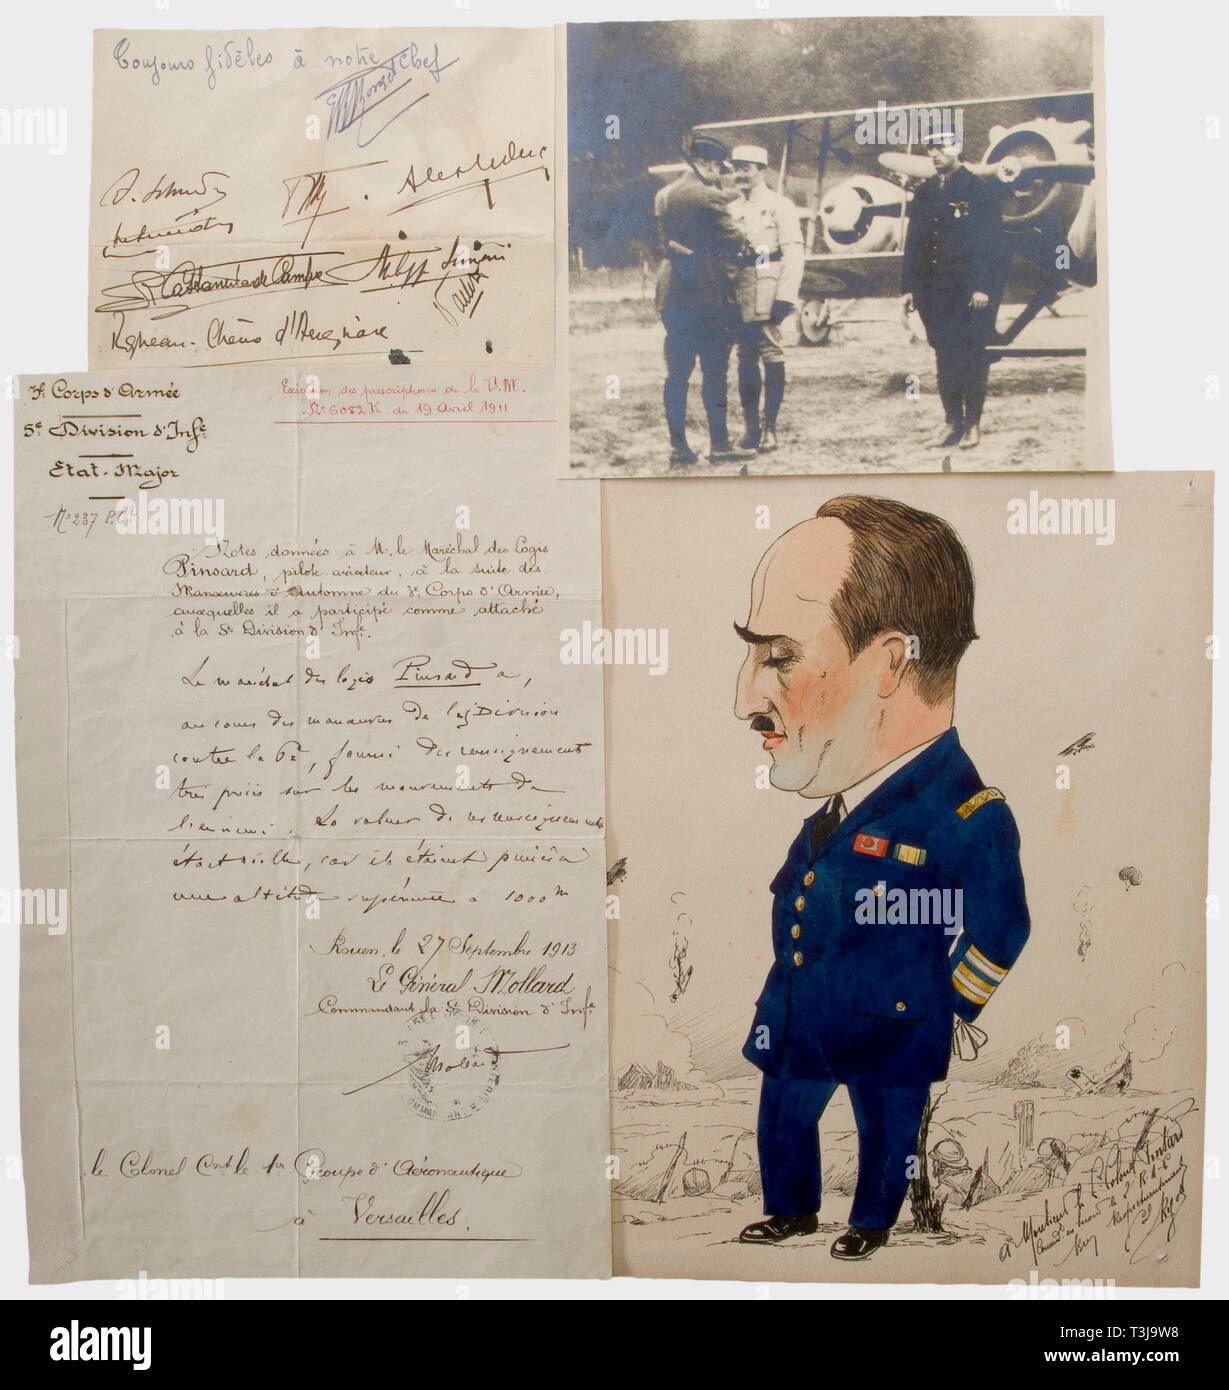 Armand Pinsard (1887 - 1953), documents and correspondence A caricature of Pinsard in the uniform of a Luftwaffe colonel, ink, watercolour, dedicated at the lower right. Dimensions 21 x 26 cm. Take-off confirmation for a flight on 20 June 1914 at Reims (Centre d'Aviation Militaire) ca. DIN A5, hectographed, ink signature. Typed invitation from the Aero-Club de France for the Award of the Great Gold Medal, January 1917. Typed letter from the Aero-Club be Belgique for the award of the medal on the occasion of the meeting for the VII Olympiad in Antwerp, October, 1920. Handwri, Editorial-Use-Only Stock Photo